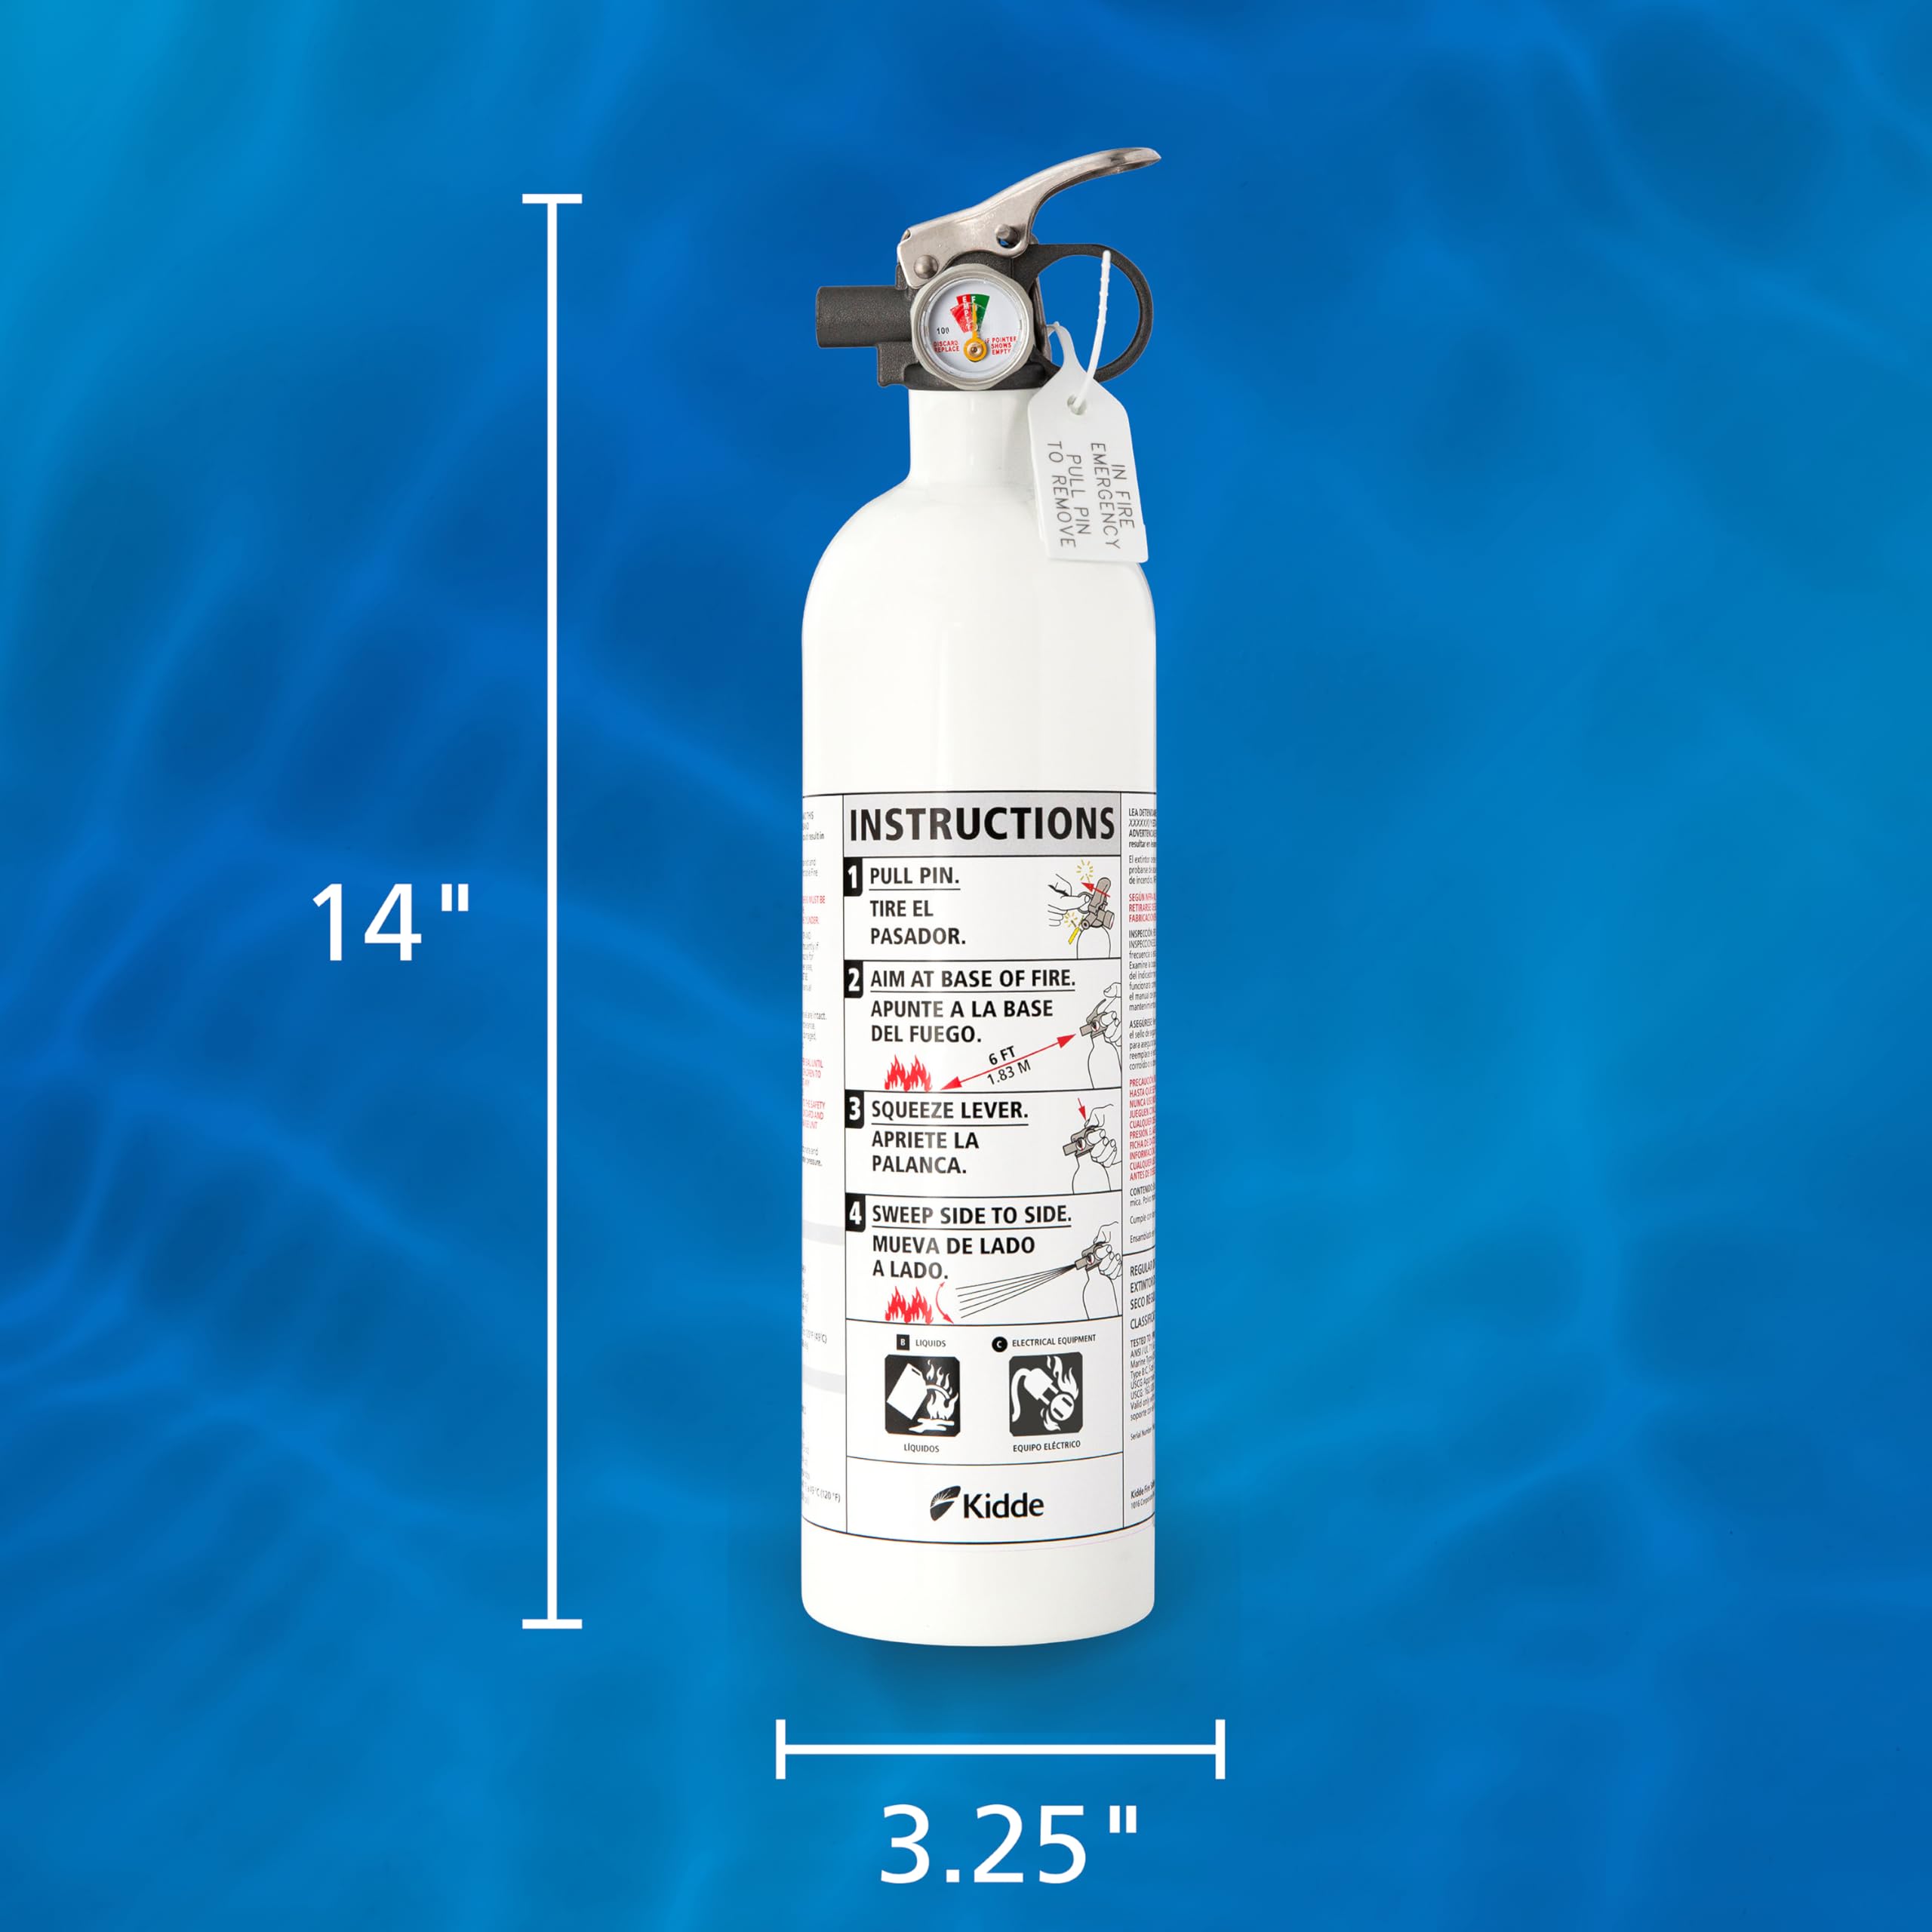 Kidde Mariner PWC Marine Fire Extinguisher for Boats, 5-B:C, 3.3 Lbs., Coast Guard Approved, Mounting Bracket (Included), White